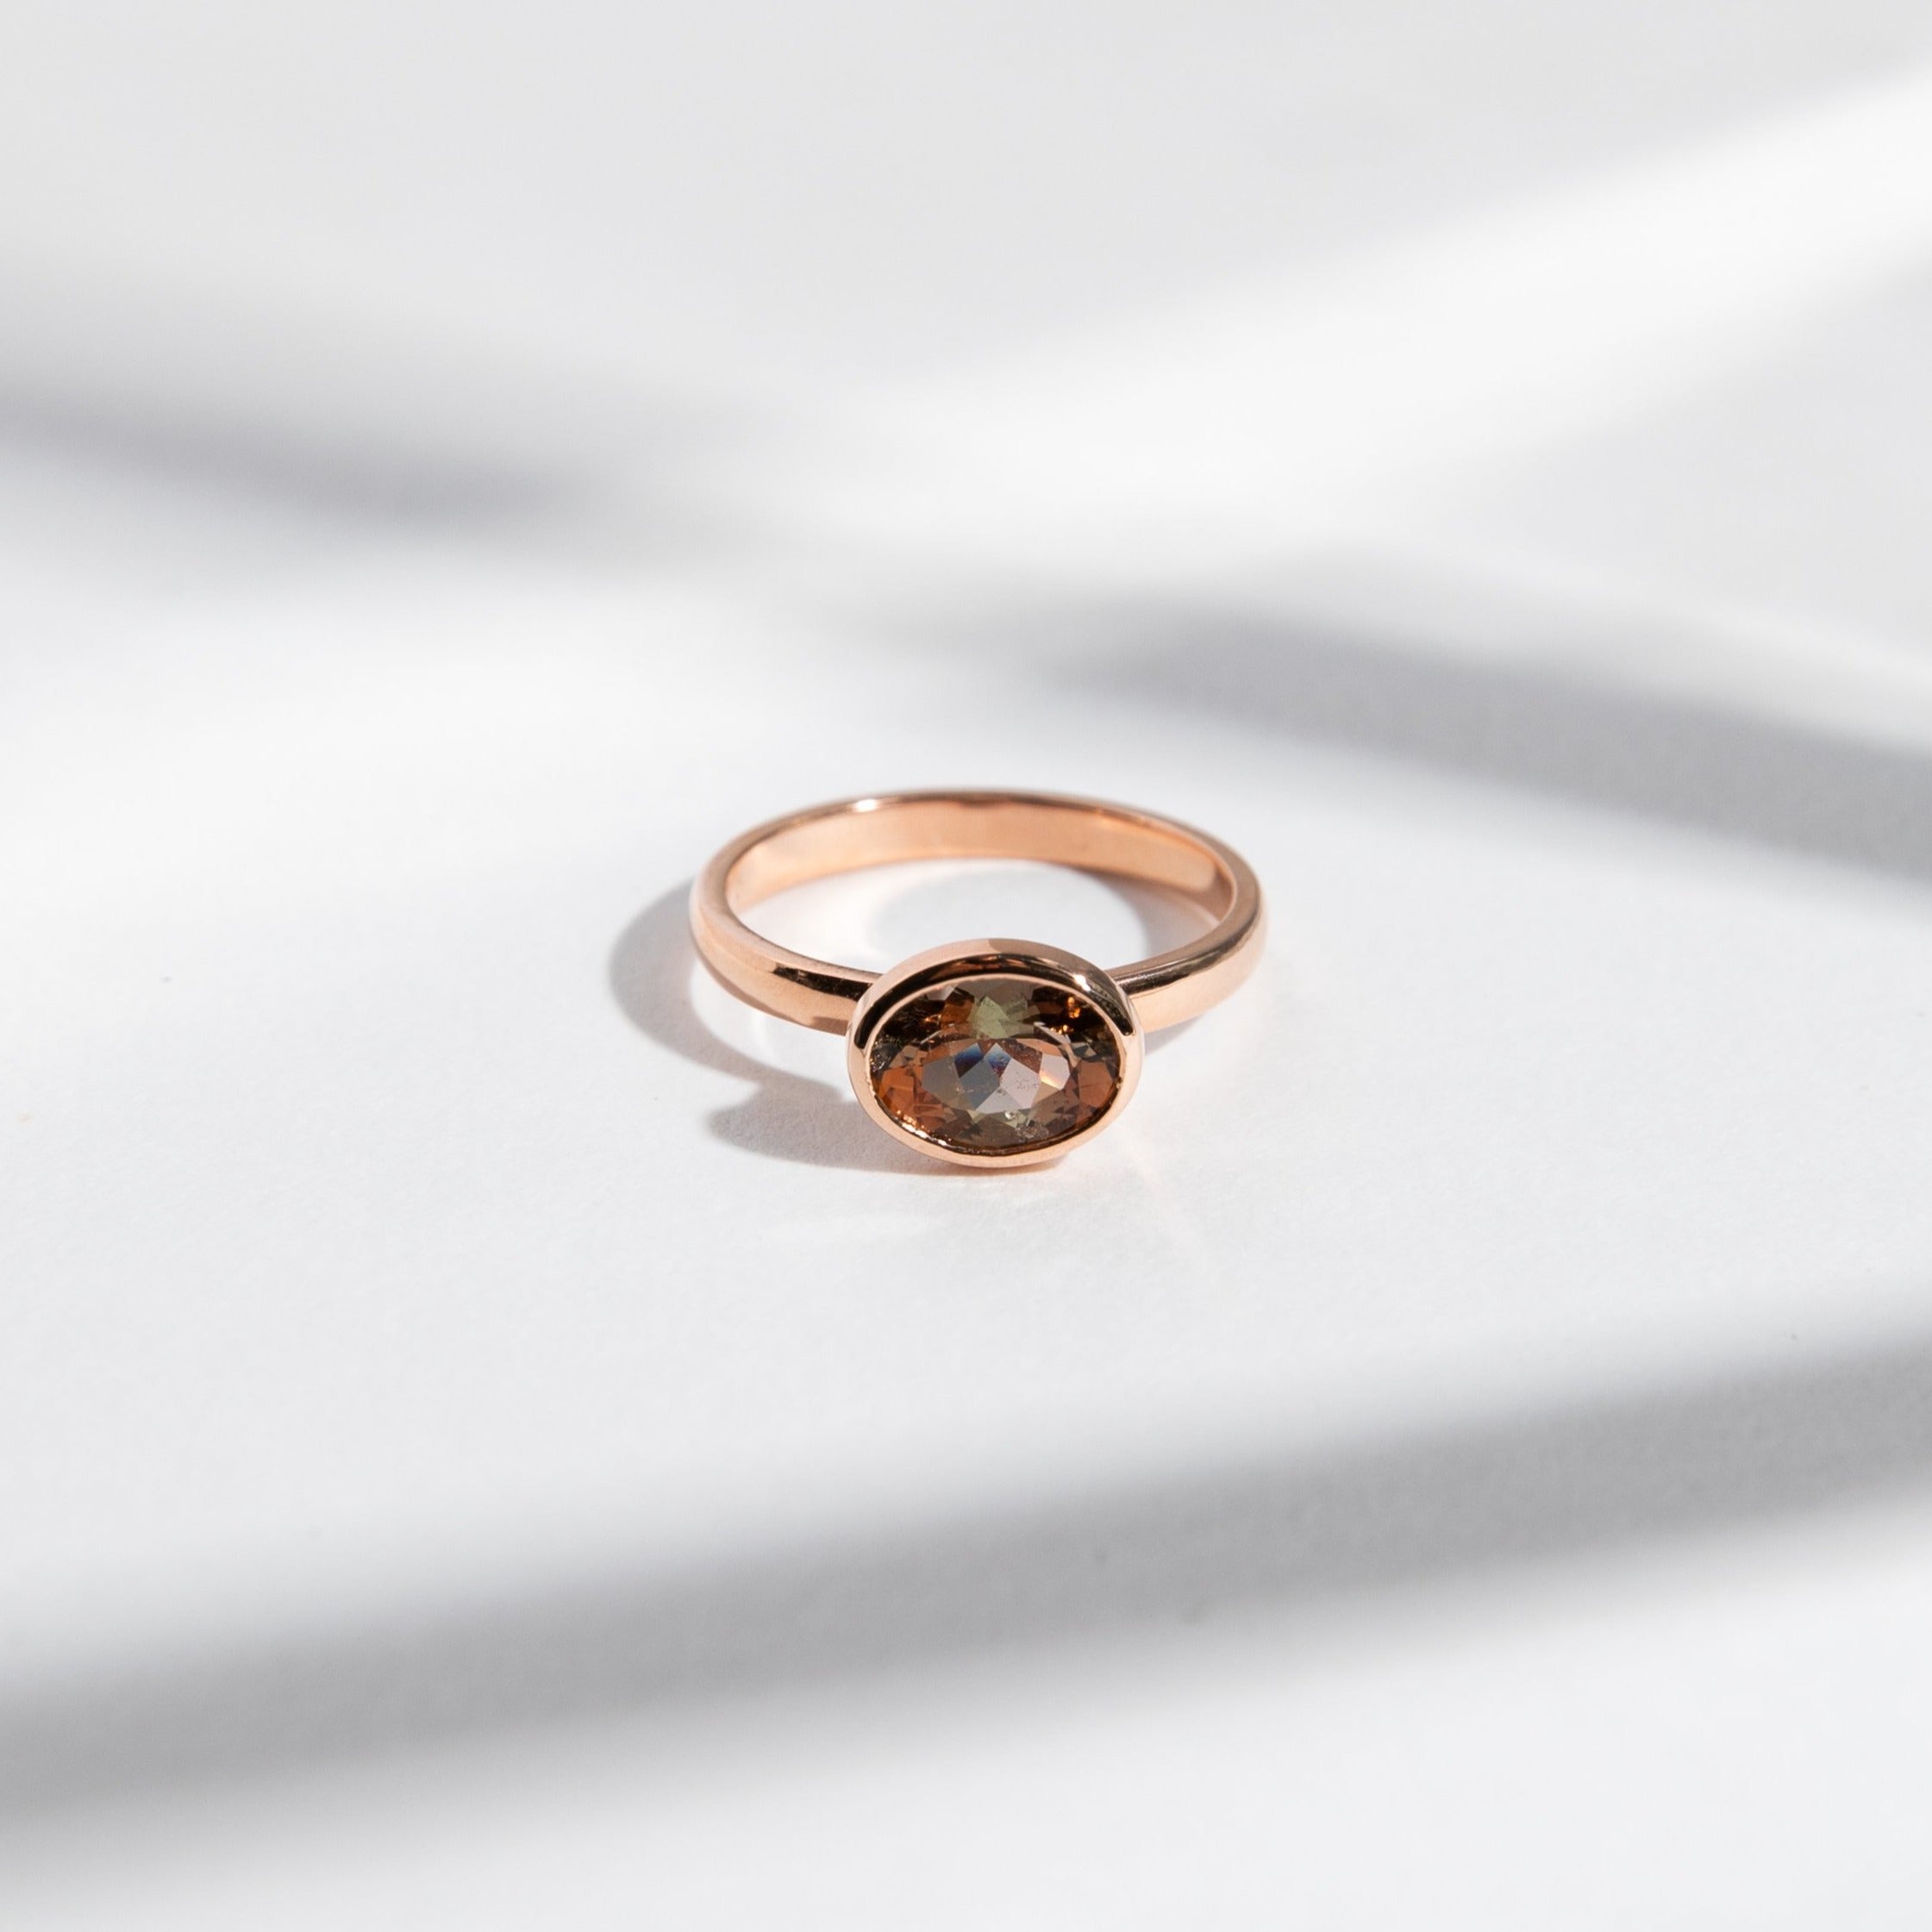 Syd Unconventional Ring in 14k Gold set with a 1.2ct oval cut andalusite By SHW Fine Jewelry NYC